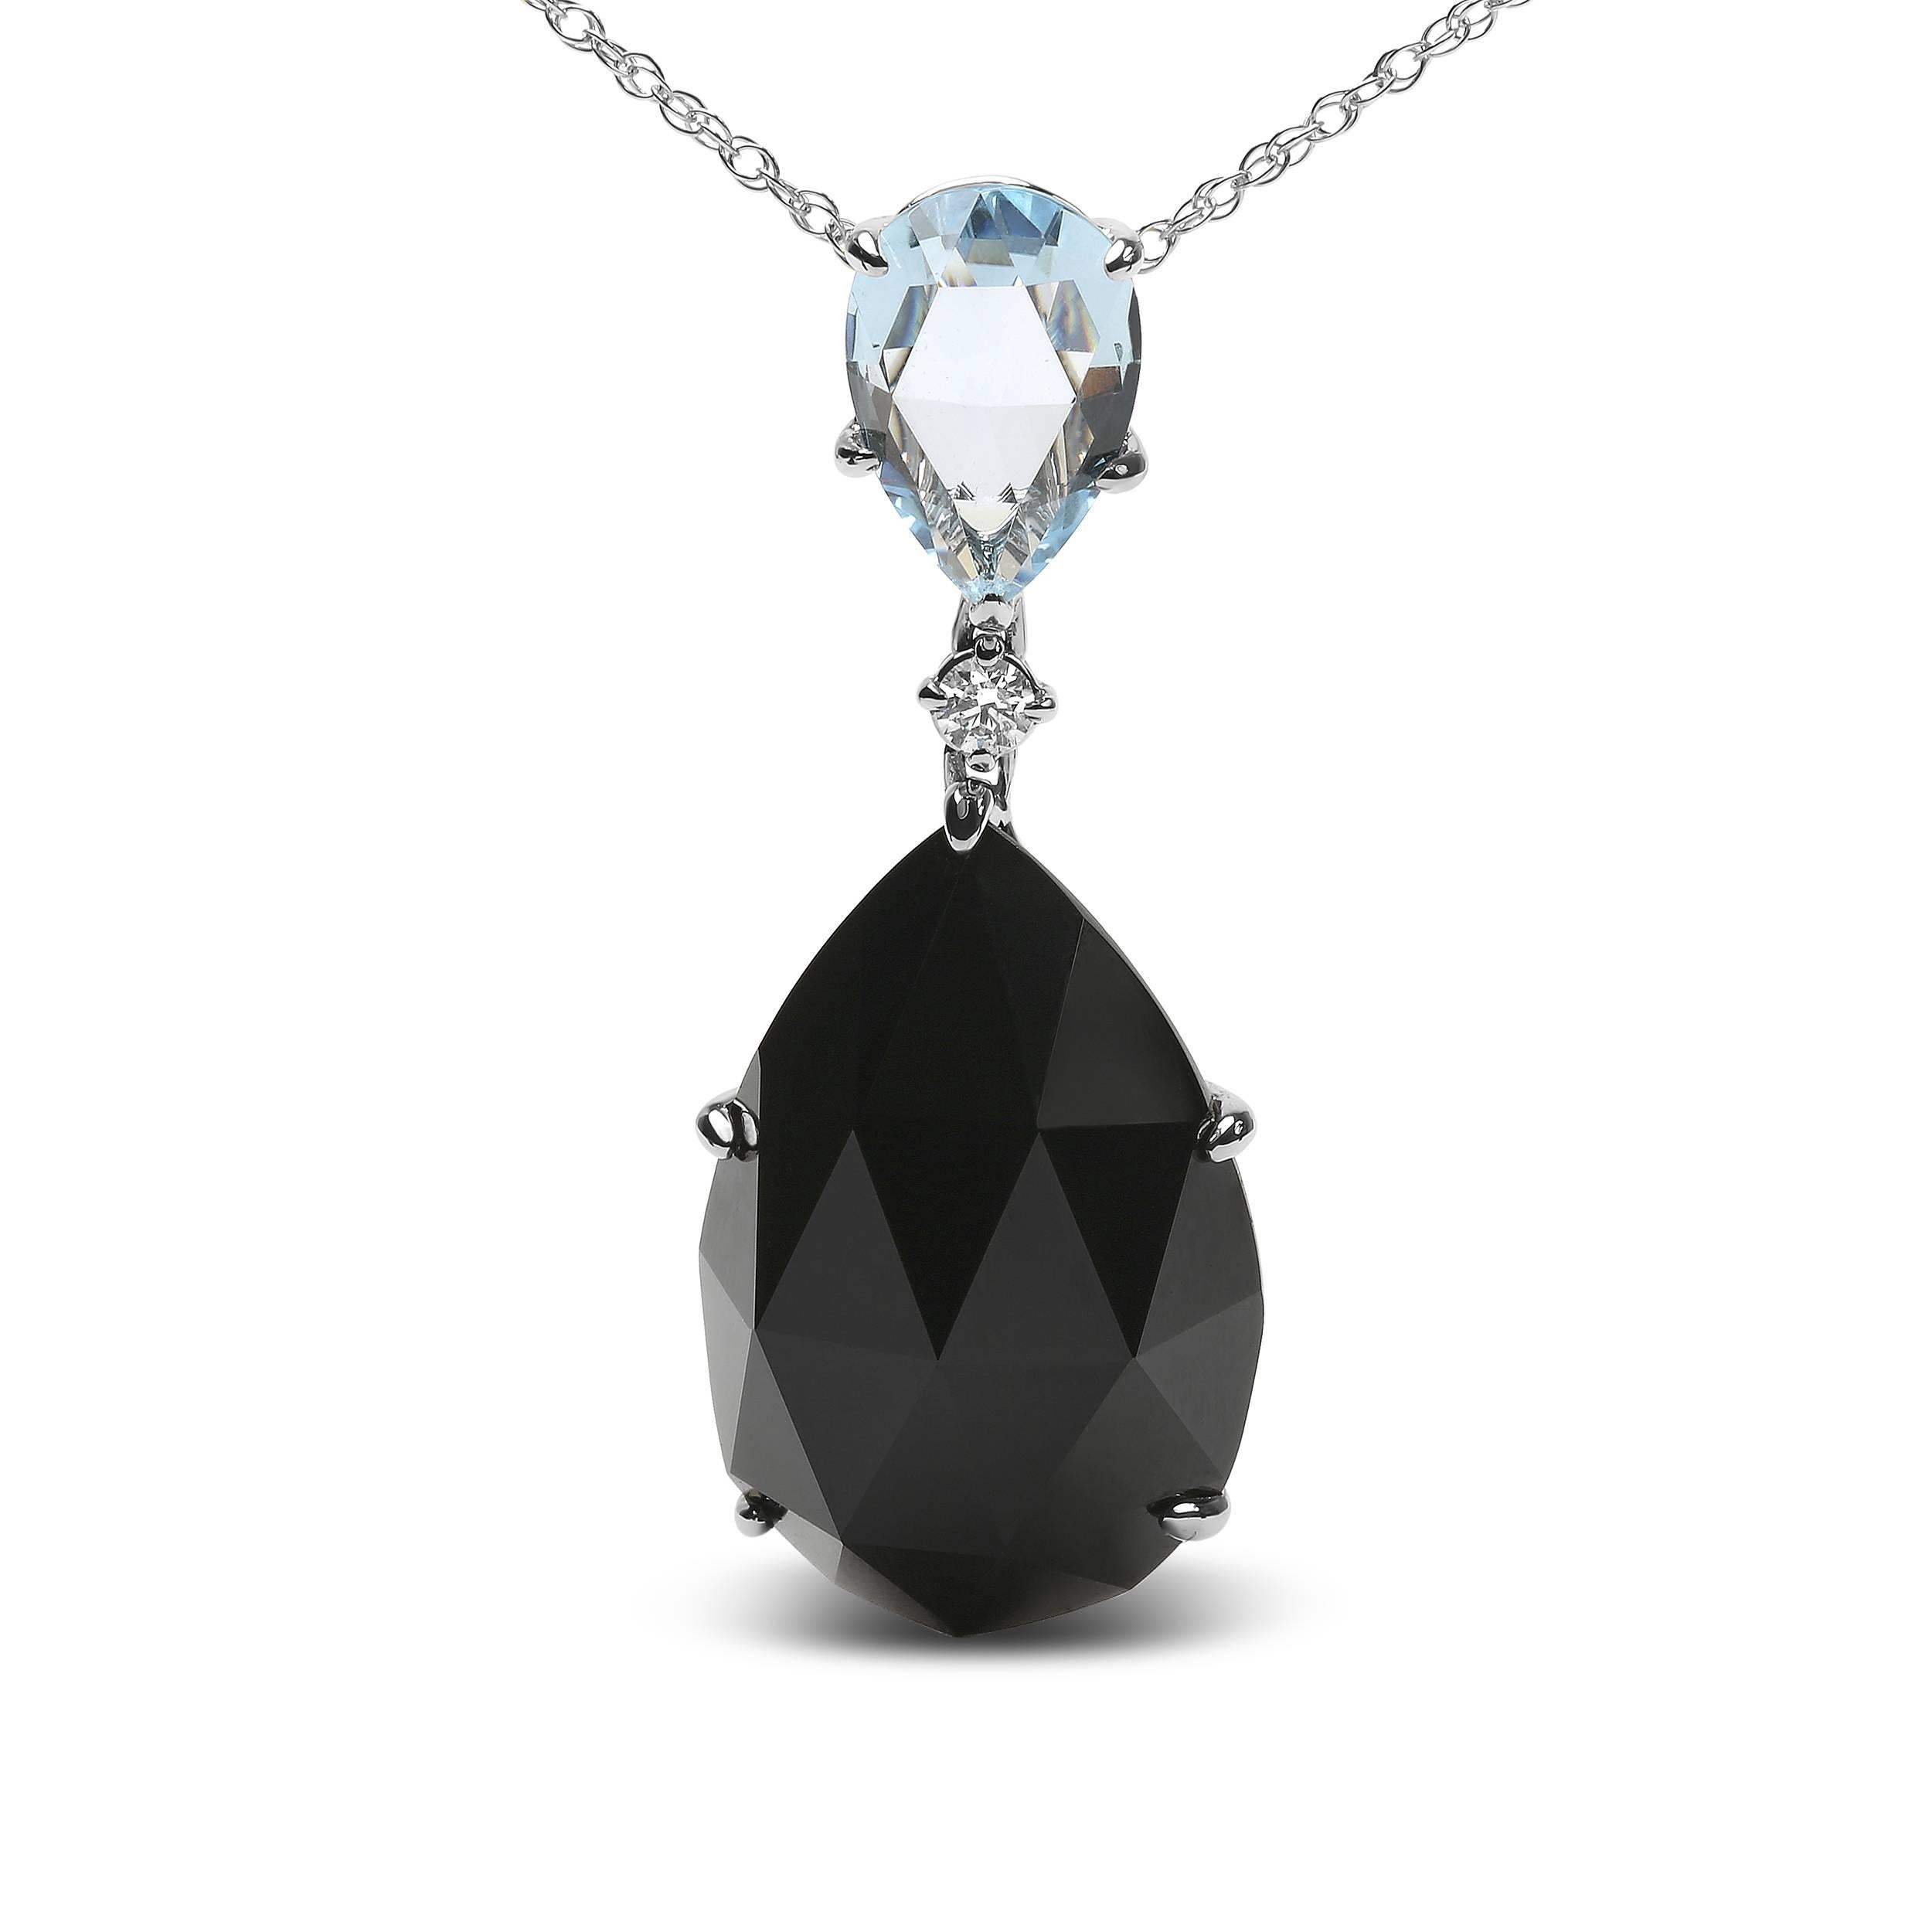 Natural gemstones and elegant aesthetic appeal make this 18k white gold pendant necklace an instant beauty. The centerpiece is an eye-catching 25x15mm pear cut black onyx in a 4-prong setting with a rich array of glorious facets. A 12x8mm pear cut